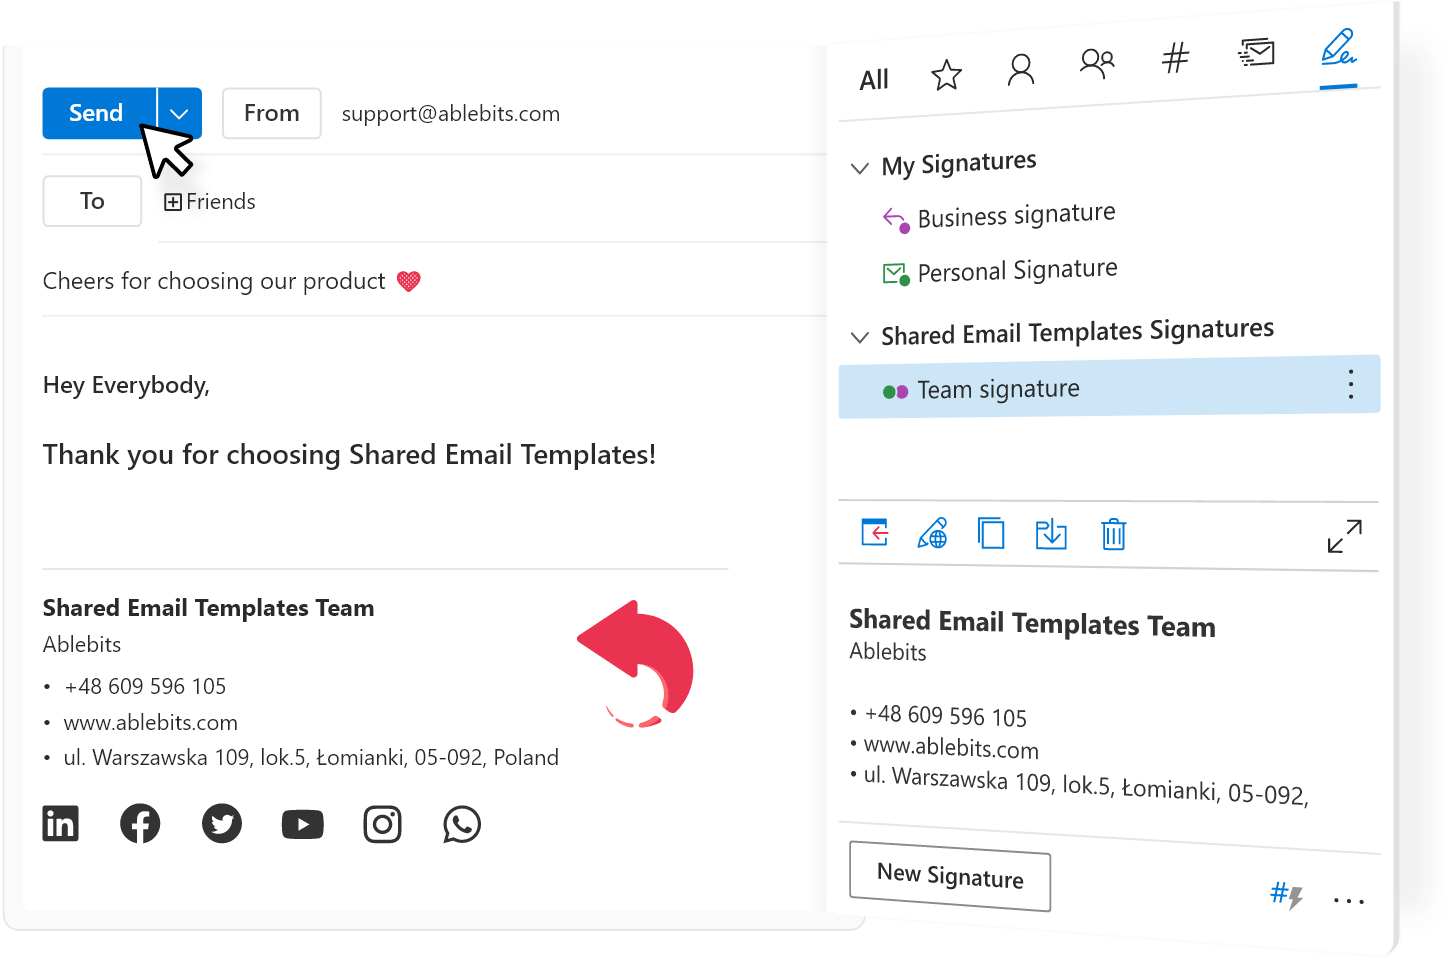 Company-wide and team-wide email signatures